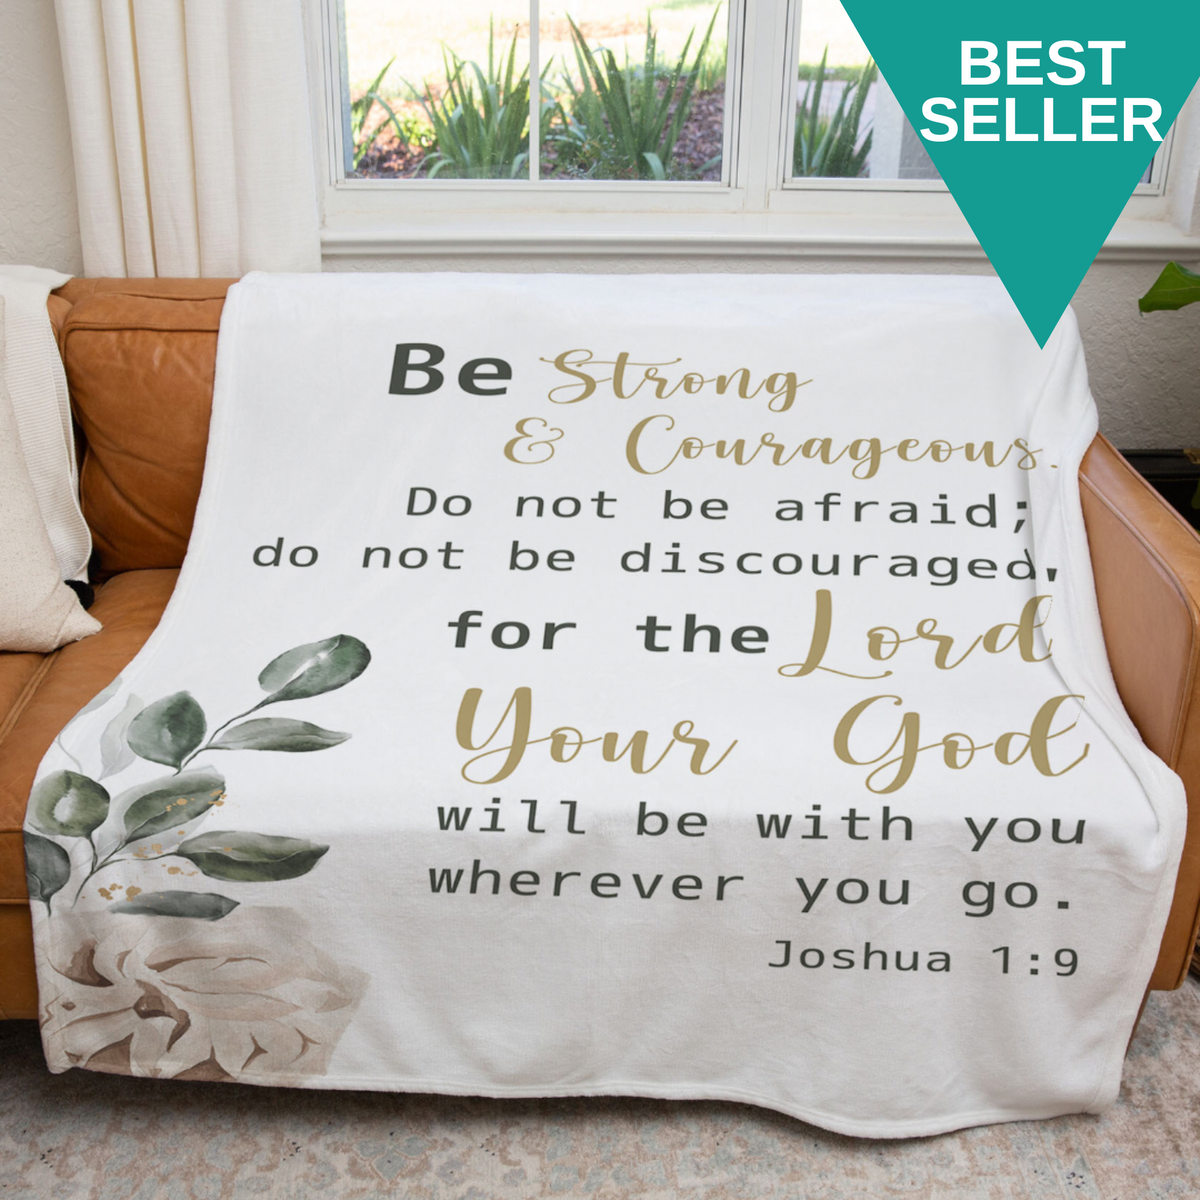 Get Well Soon Prayer Blanket - Double Layer 65x50 Throw Blanket - Scripture  Ivory Throw Blanket for Couch & Bed - Soft Blanket - Healing Gifts for